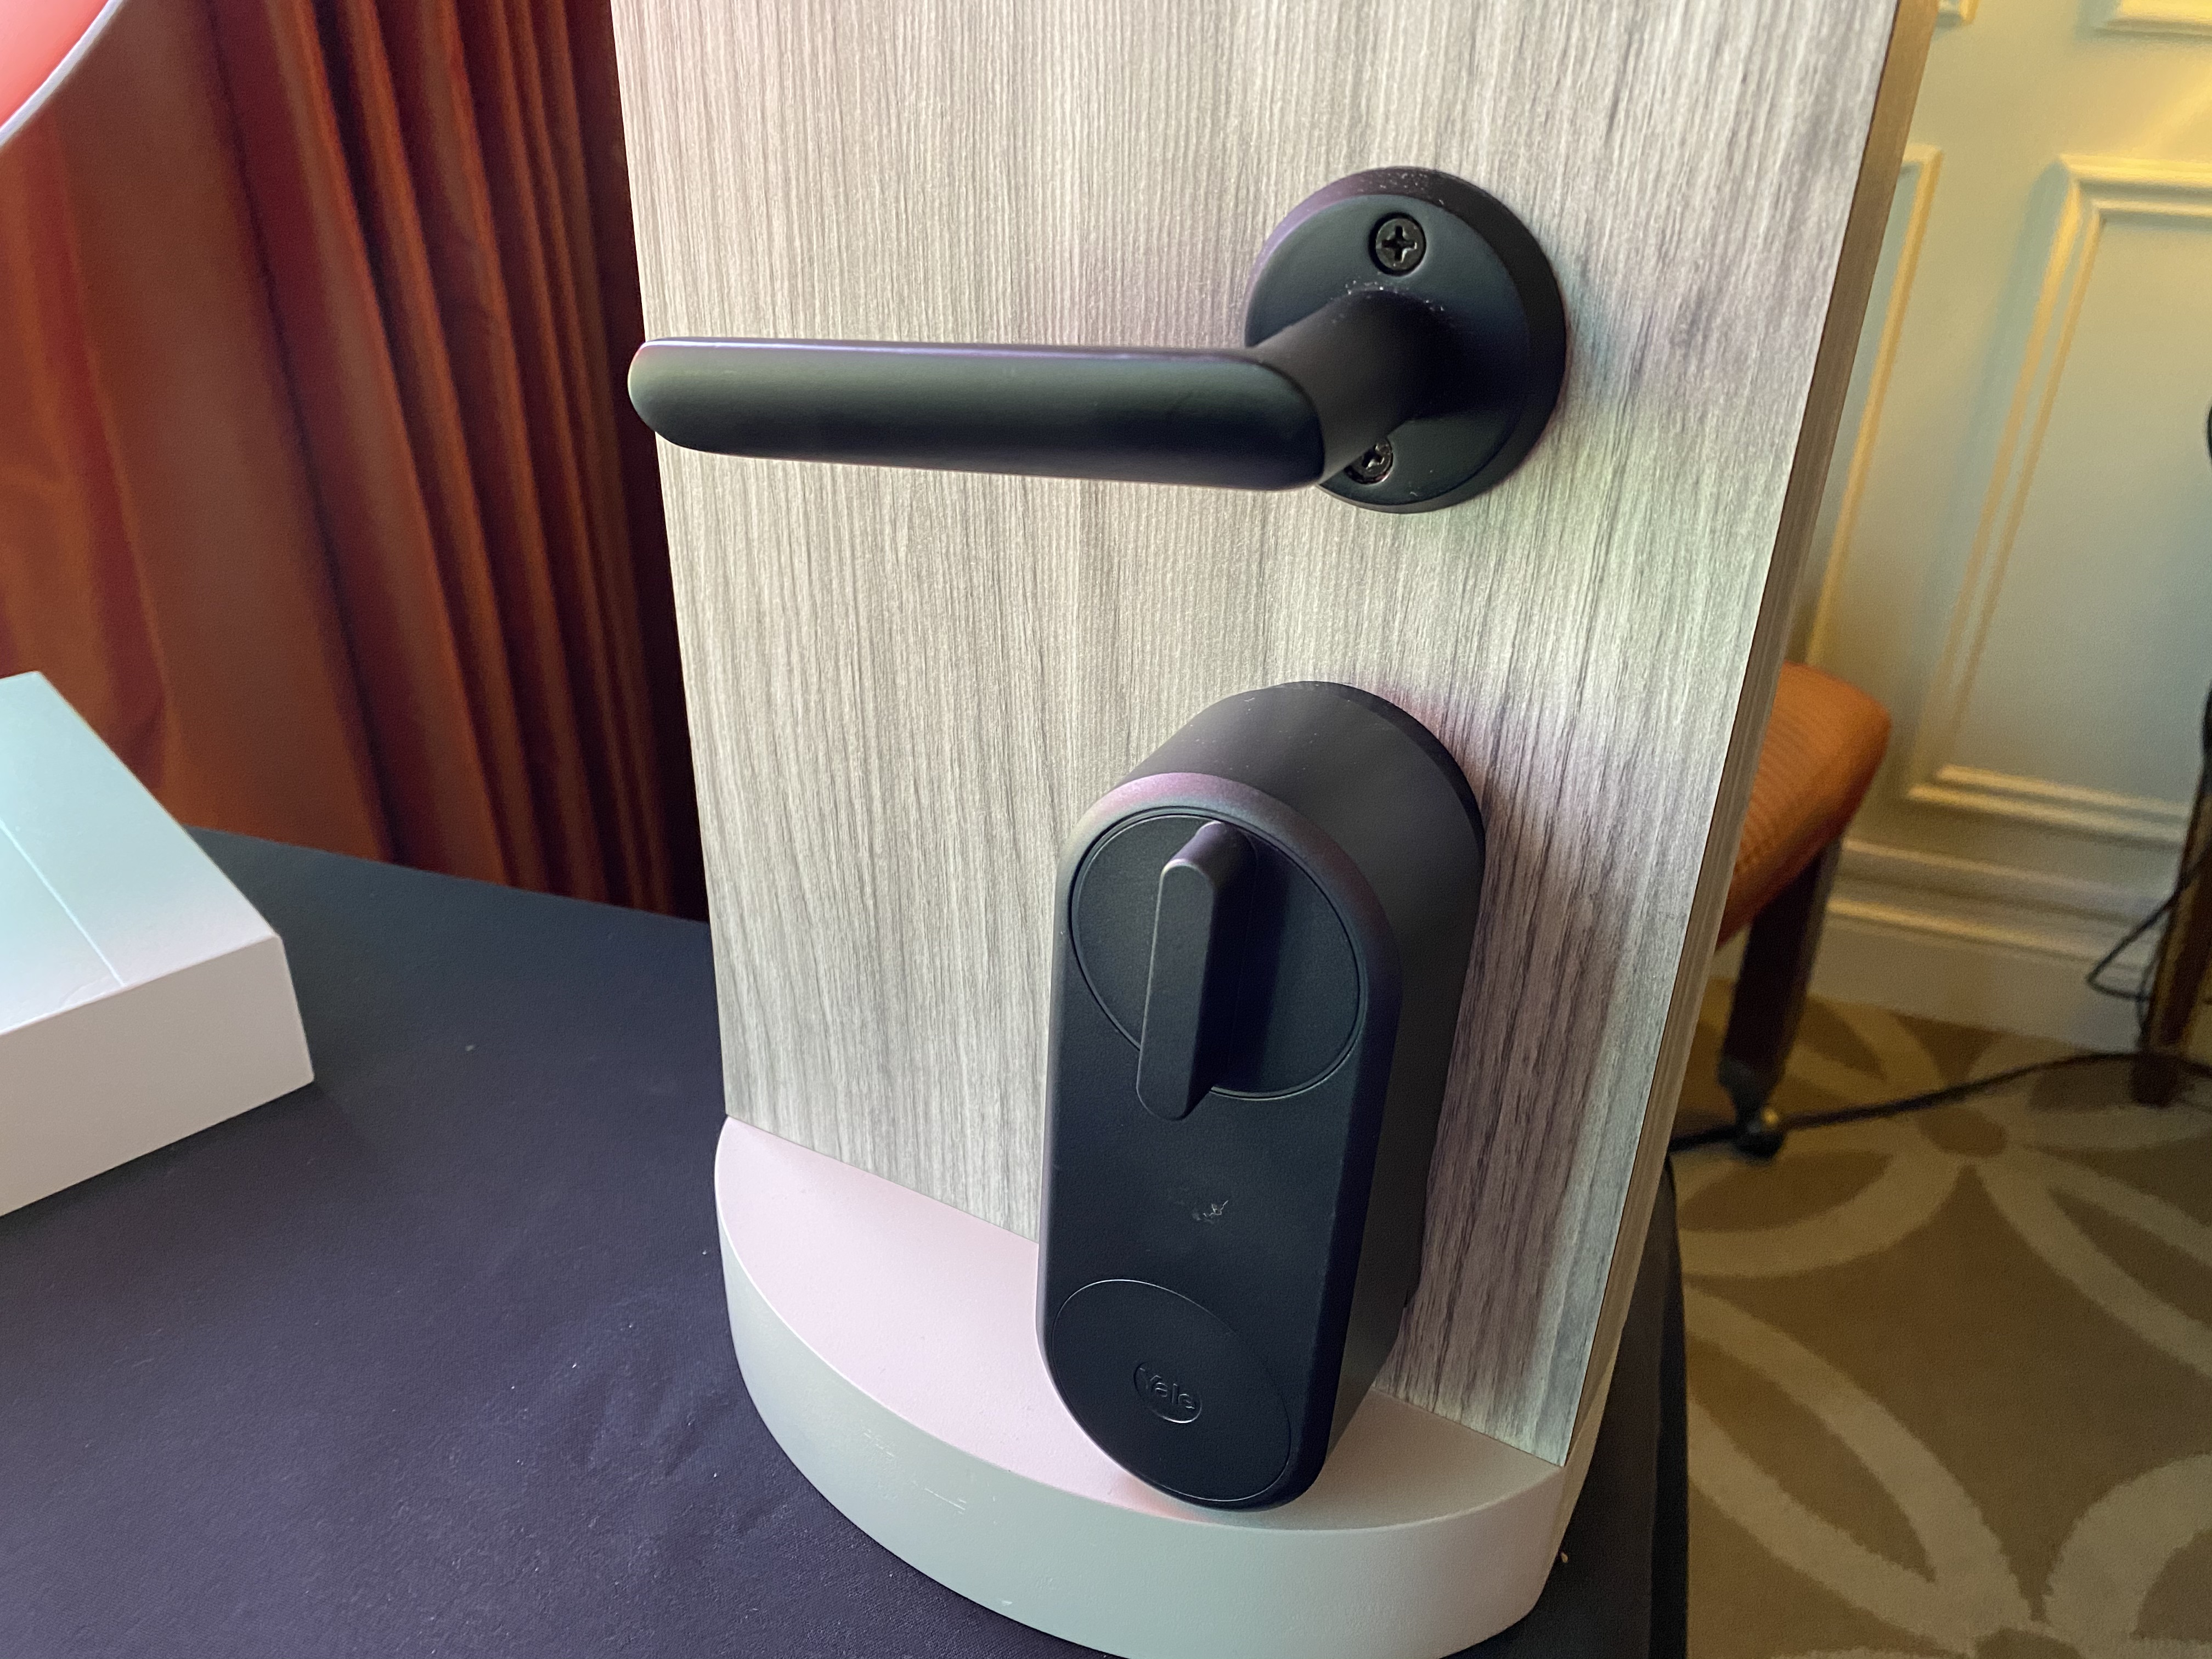 August Home ditches the bridge and Yale launches a smart lock in Europe